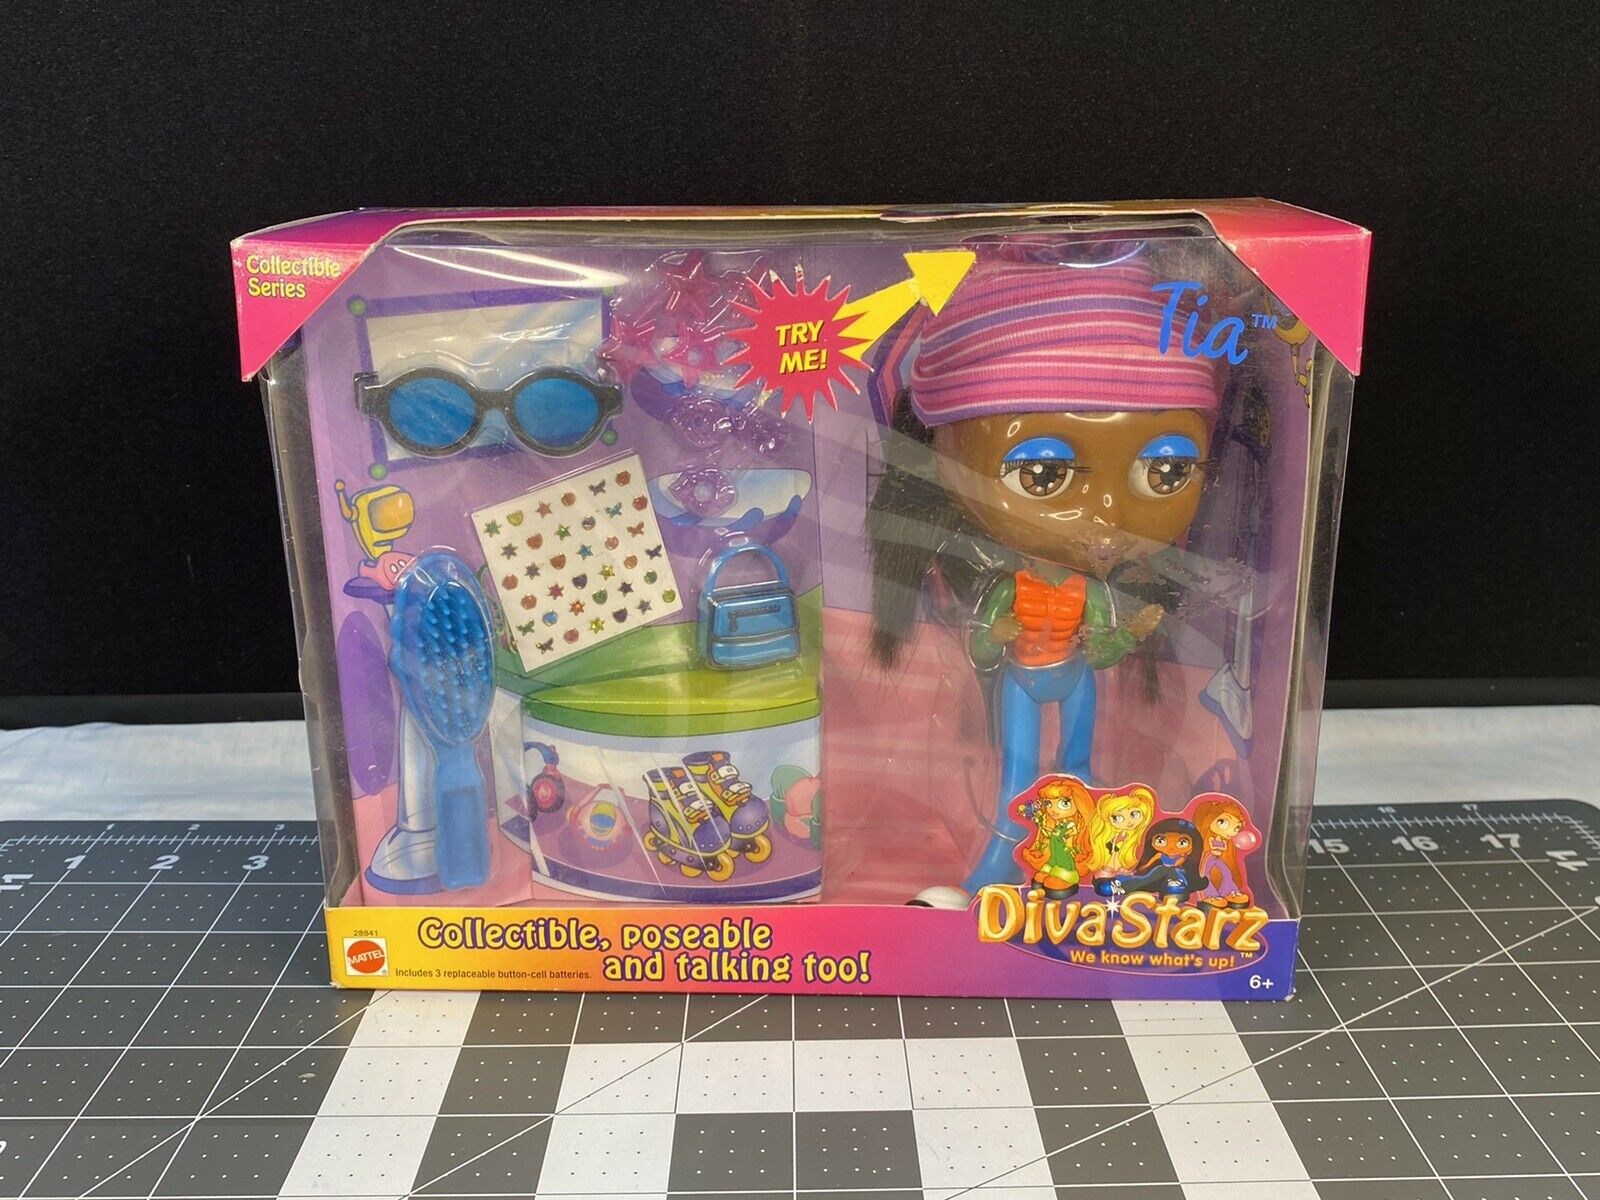 New 2000 Mattel Diva Starz "tia" Collectible, Poseable And Talking Too!